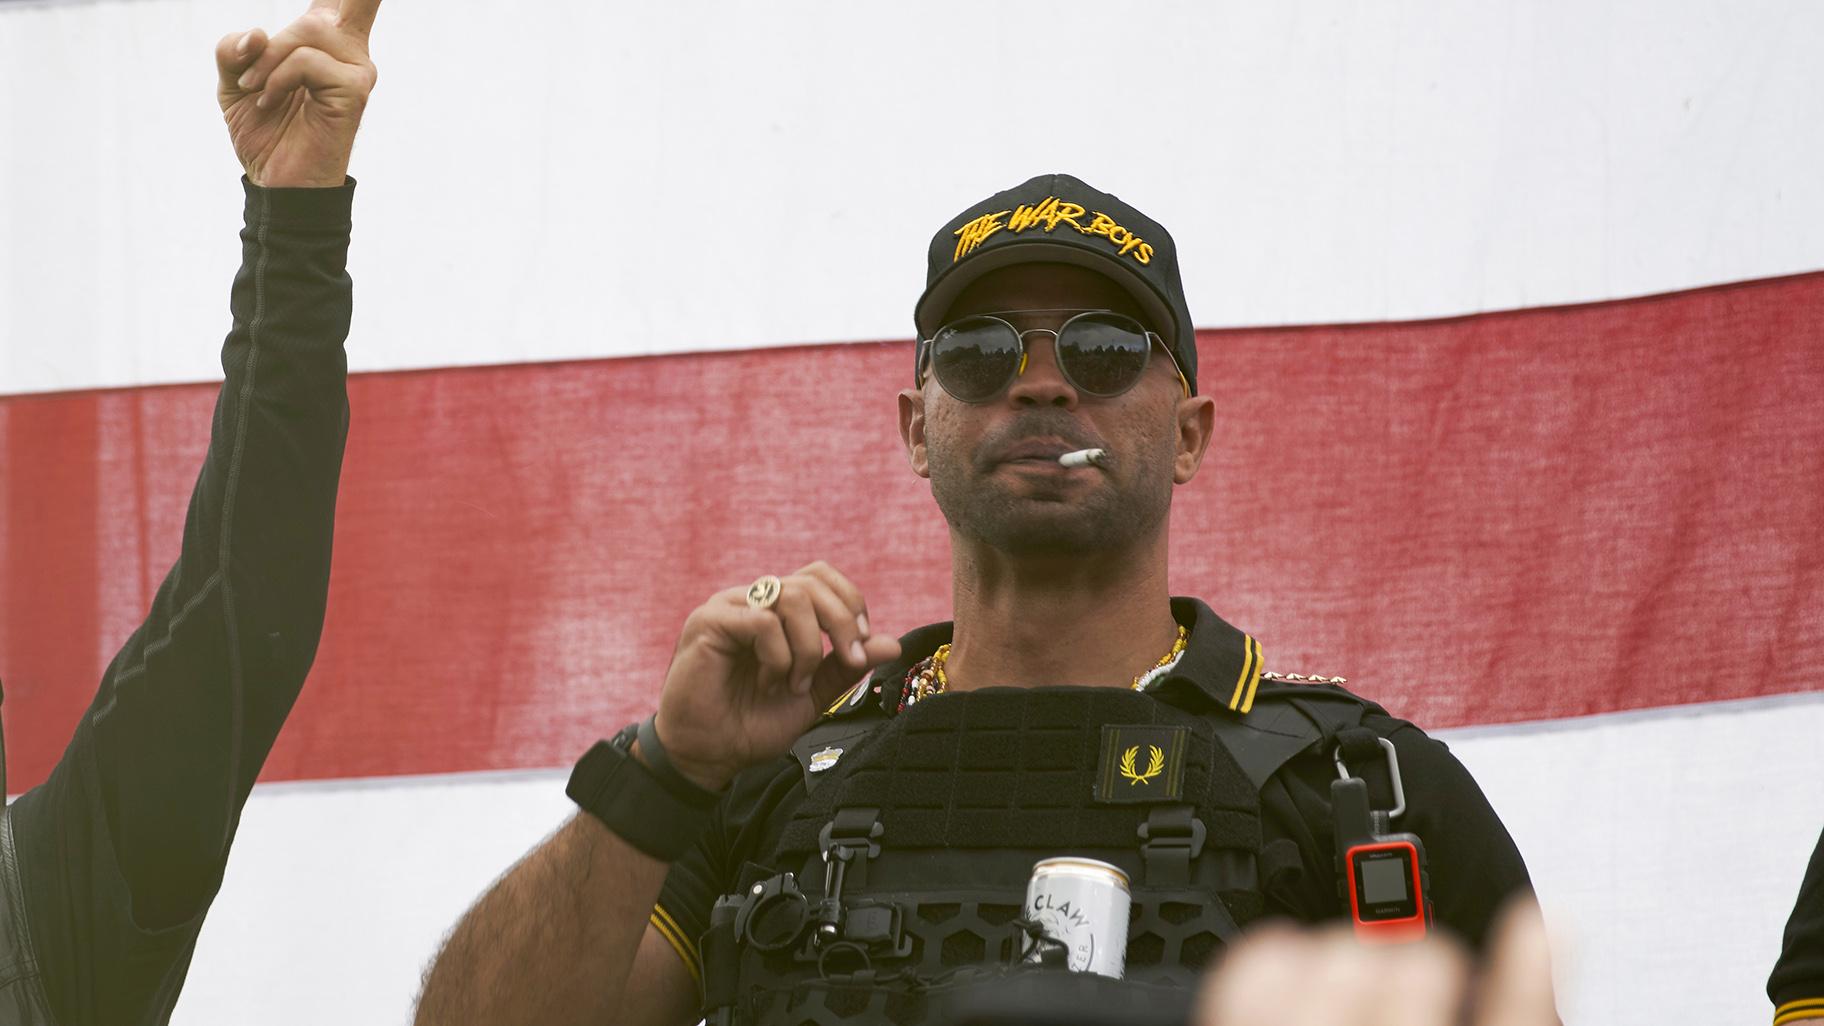 Proud Boys leader Enrique Tarrio wears a hat that says The War Boys and smokes a cigarette at a rally in Delta Park on Sept. 26, 2020, in Portland, Ore. (AP Photo / Allison Dinner, File)